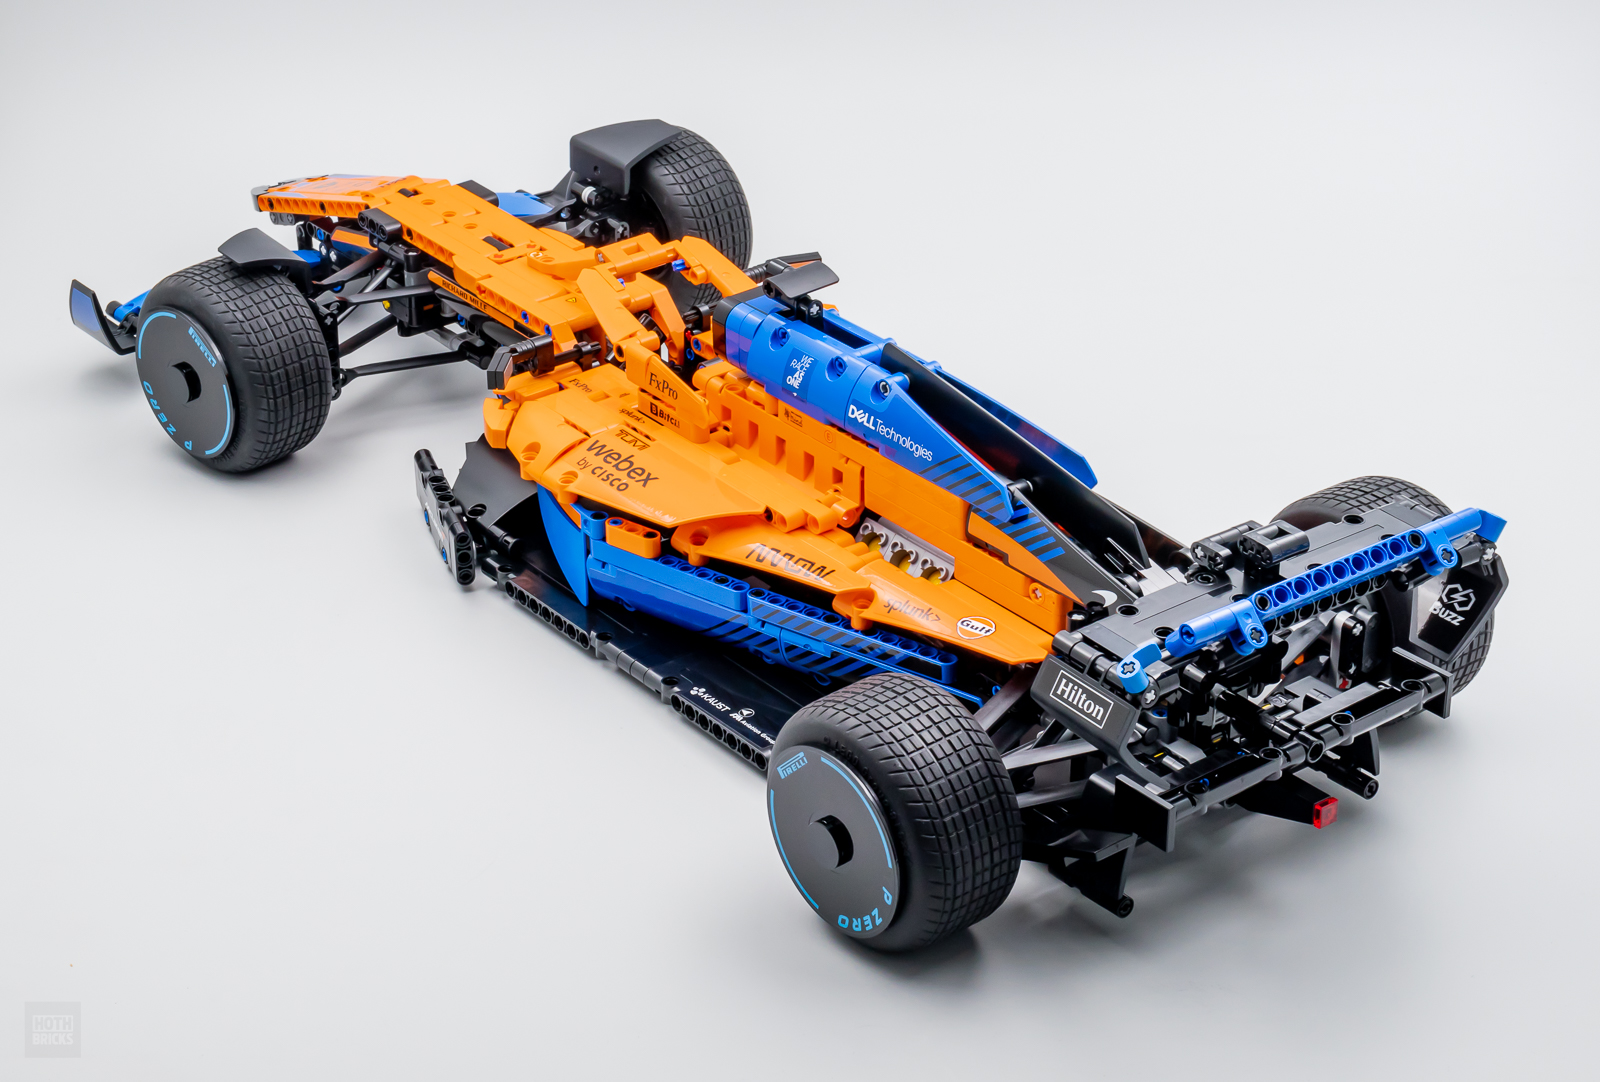 Lego McLaren F1 review: The pinnacle of motorsport and Lego engineering -  Yahoo Sports